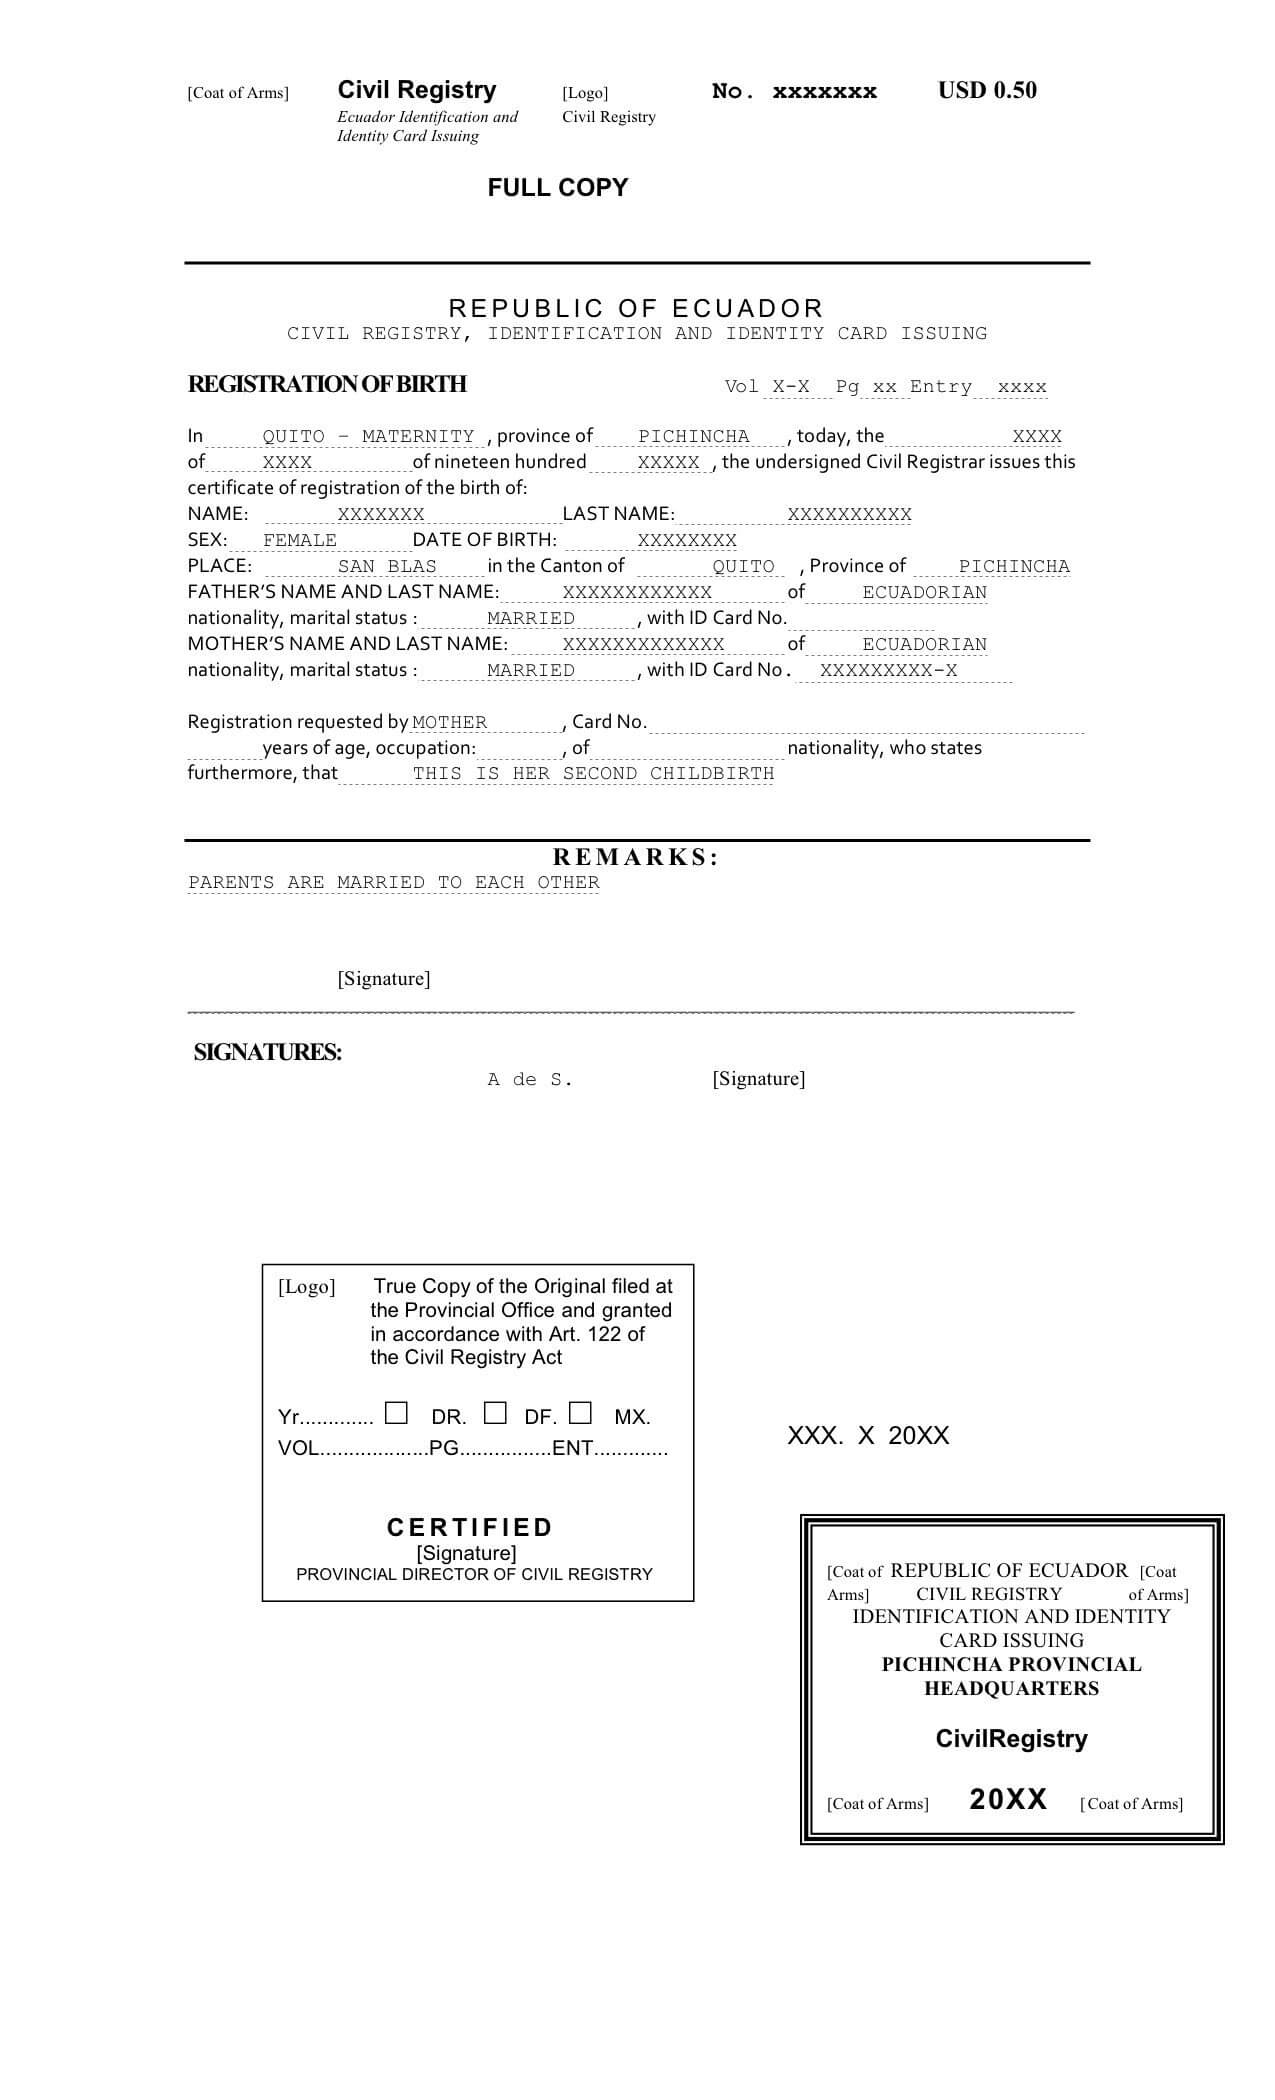 Death Certificate Translation From Spanish To English Sample Throughout Spanish To English Birth Certificate Translation Template